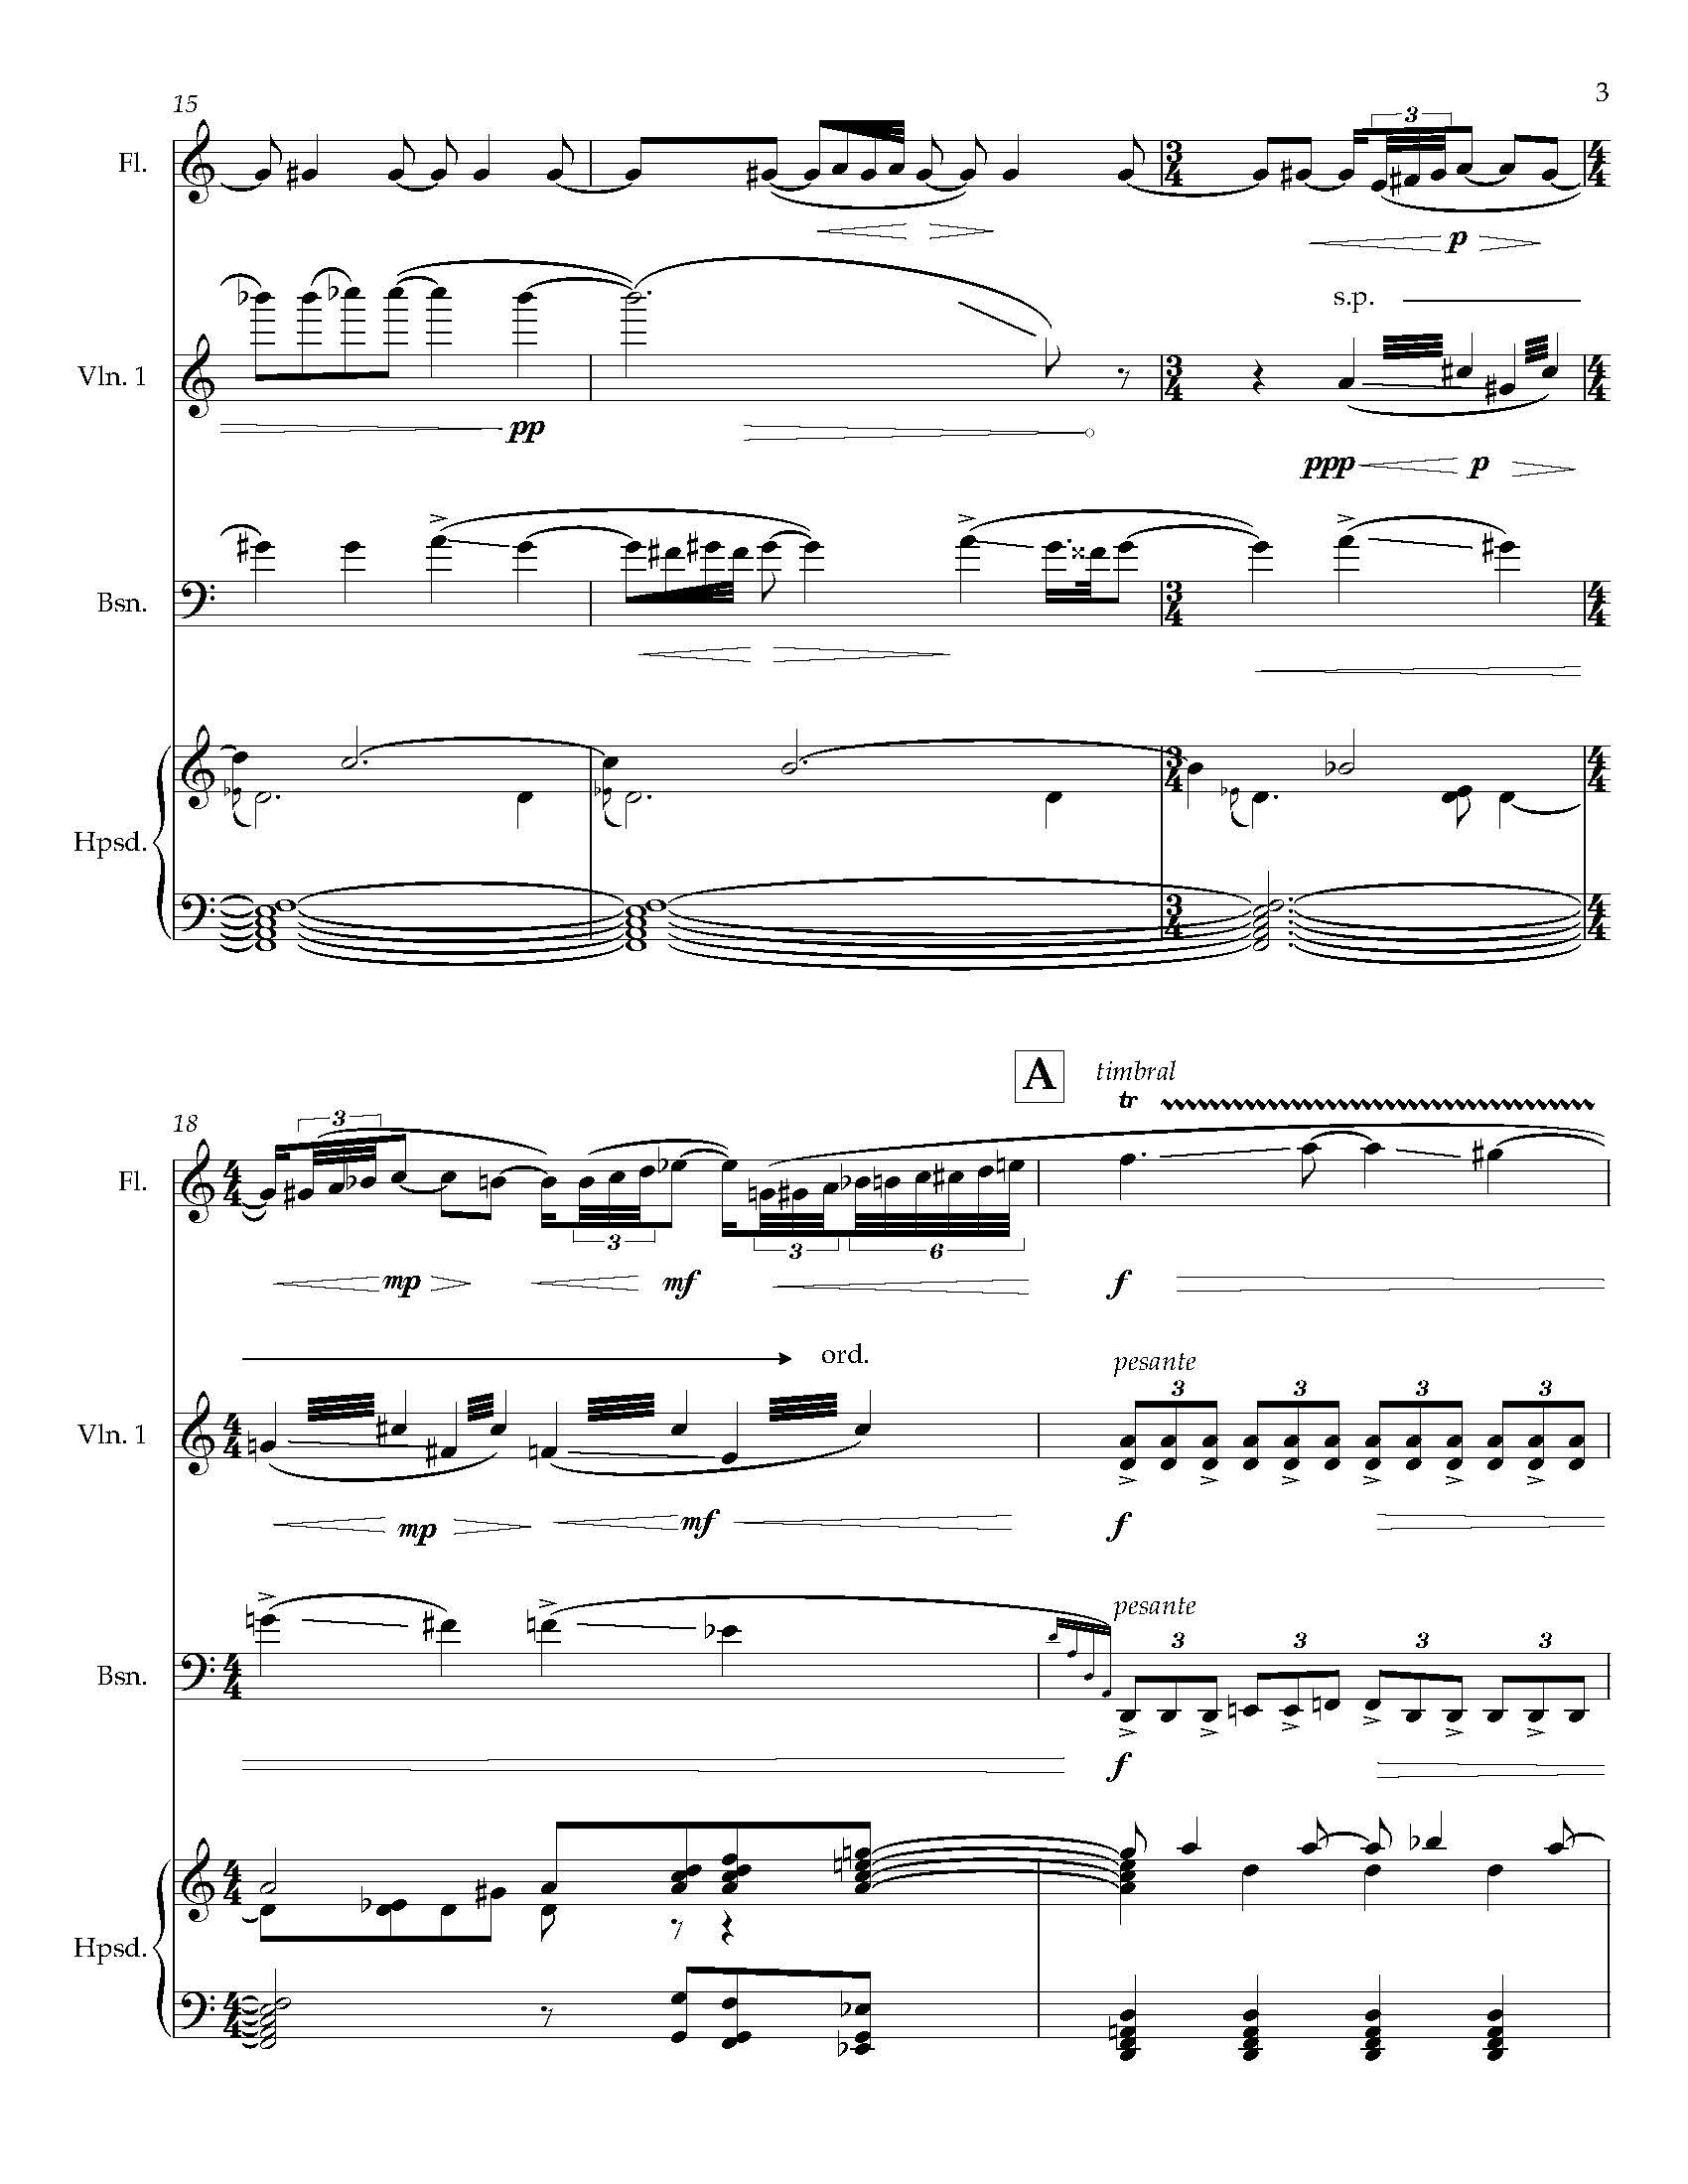 The Hourglass Equation - Complete Score_Page_09.jpg